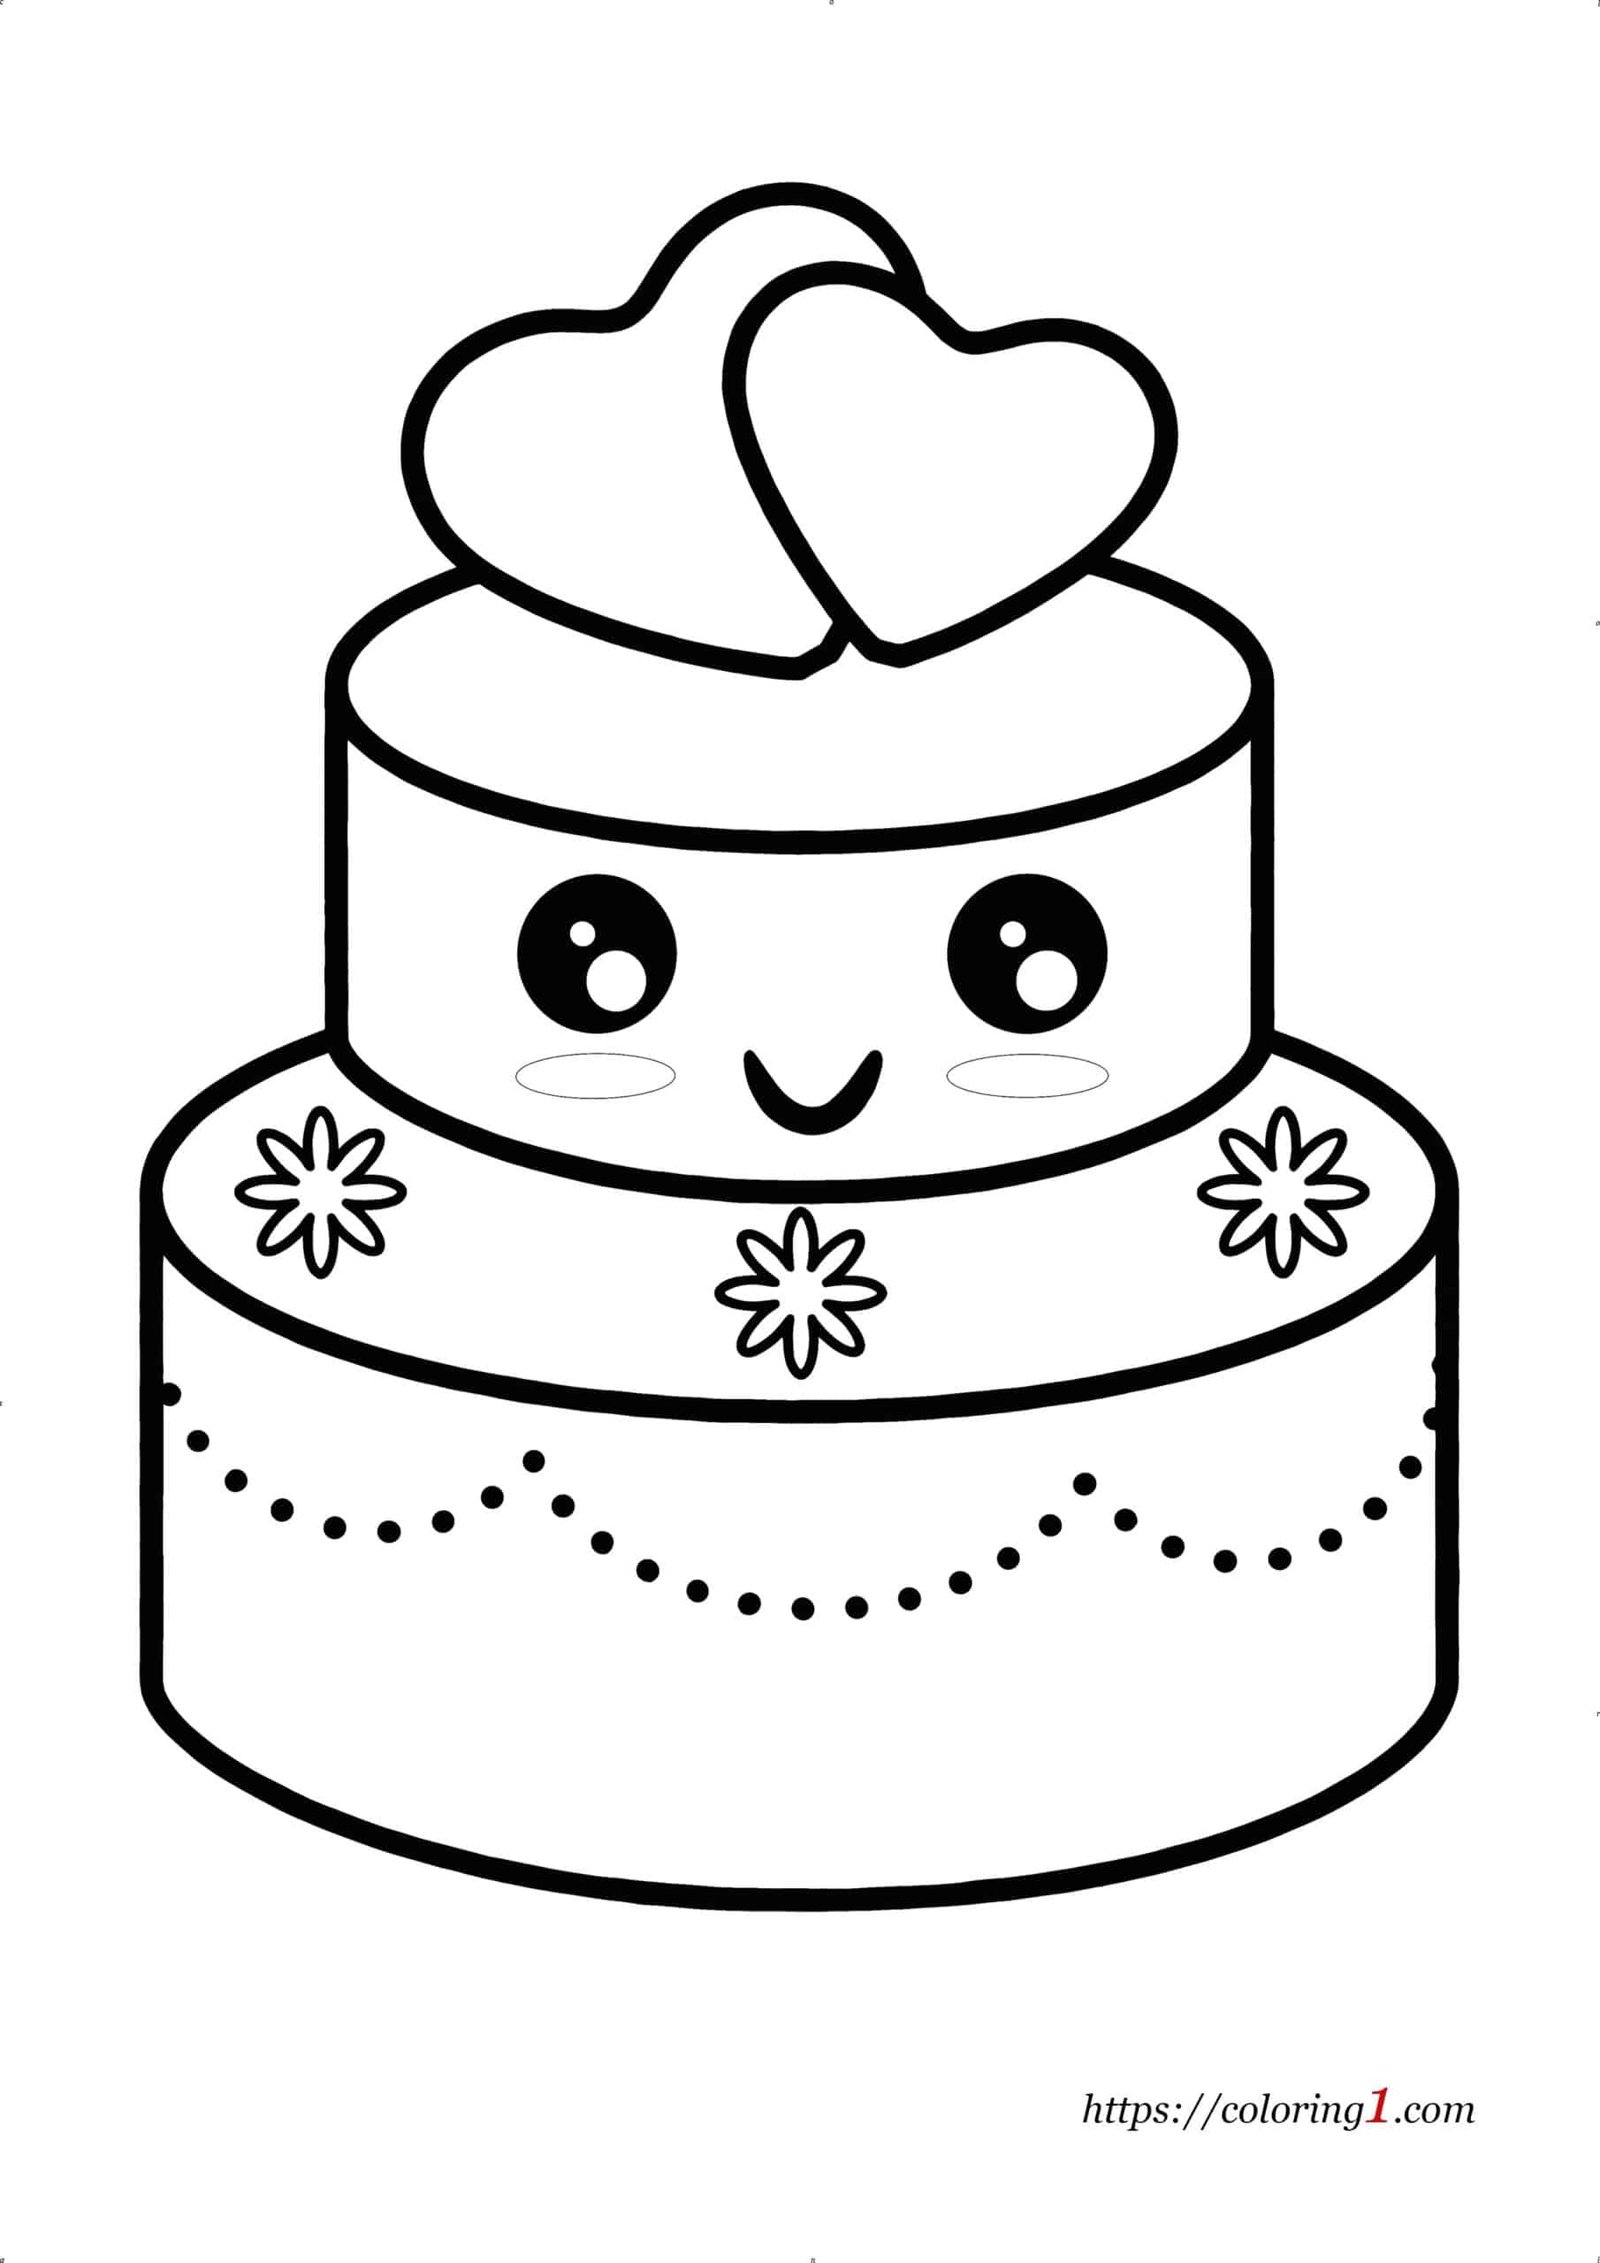 Wedding Cake with Hearts coloring page